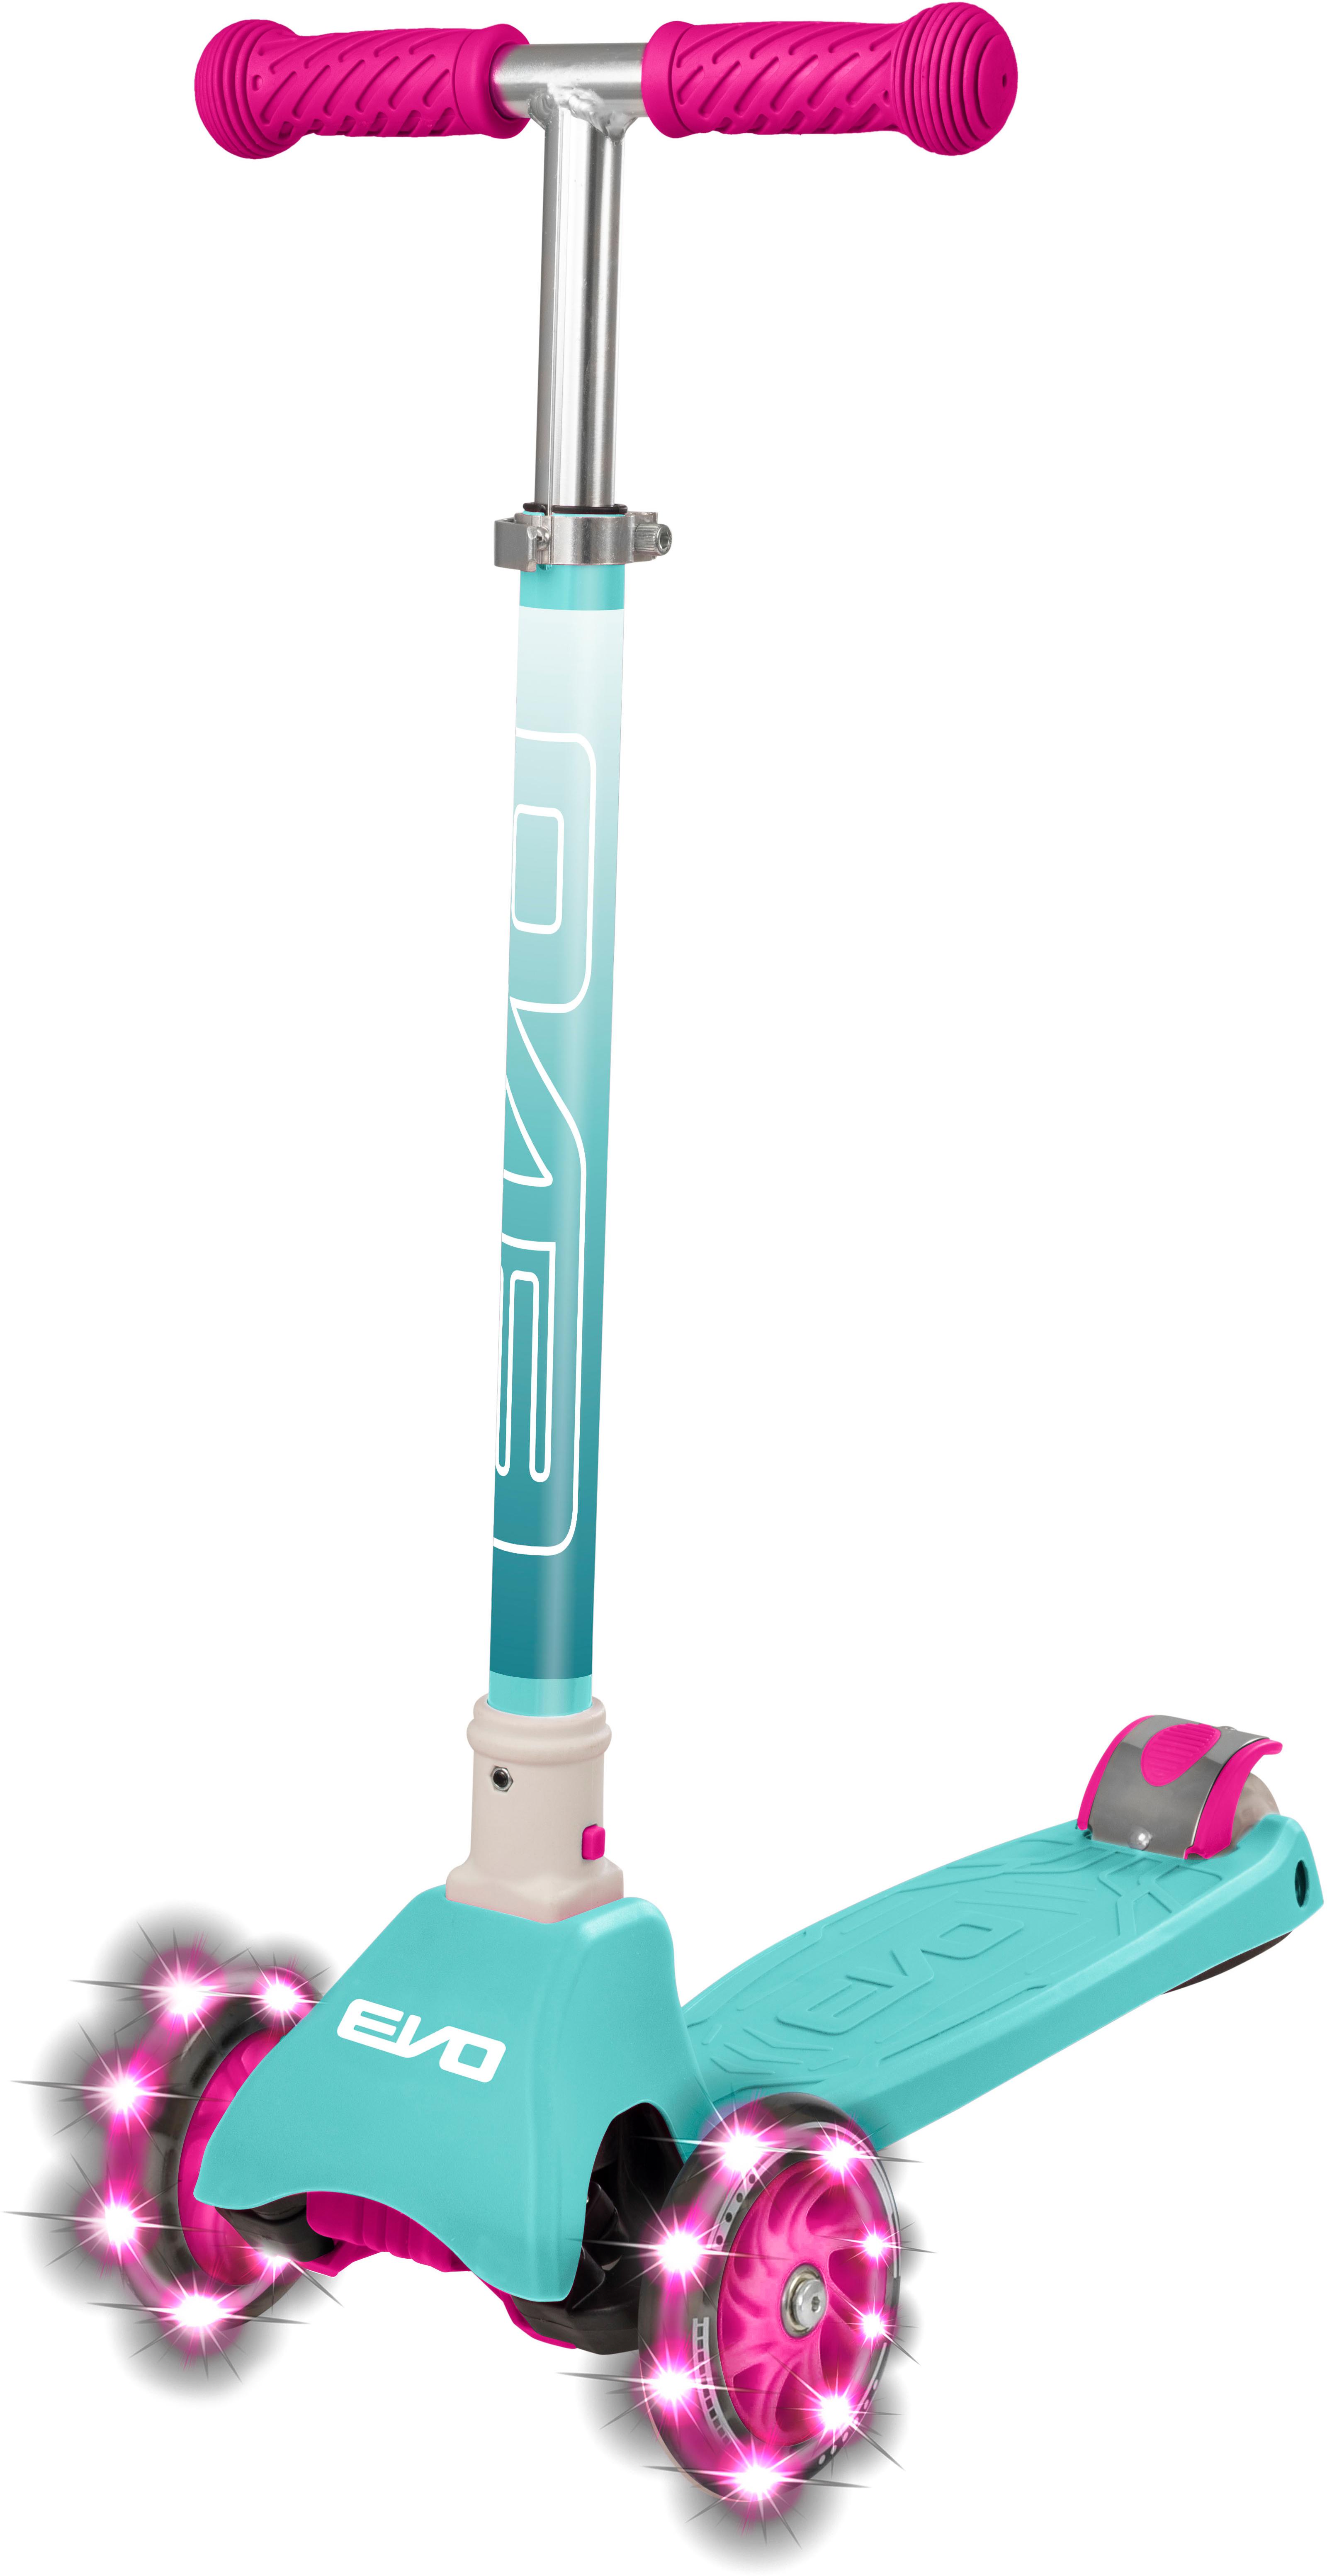 Evo+ Cruiser Kids Scooter With Led Wheels - Turquoise